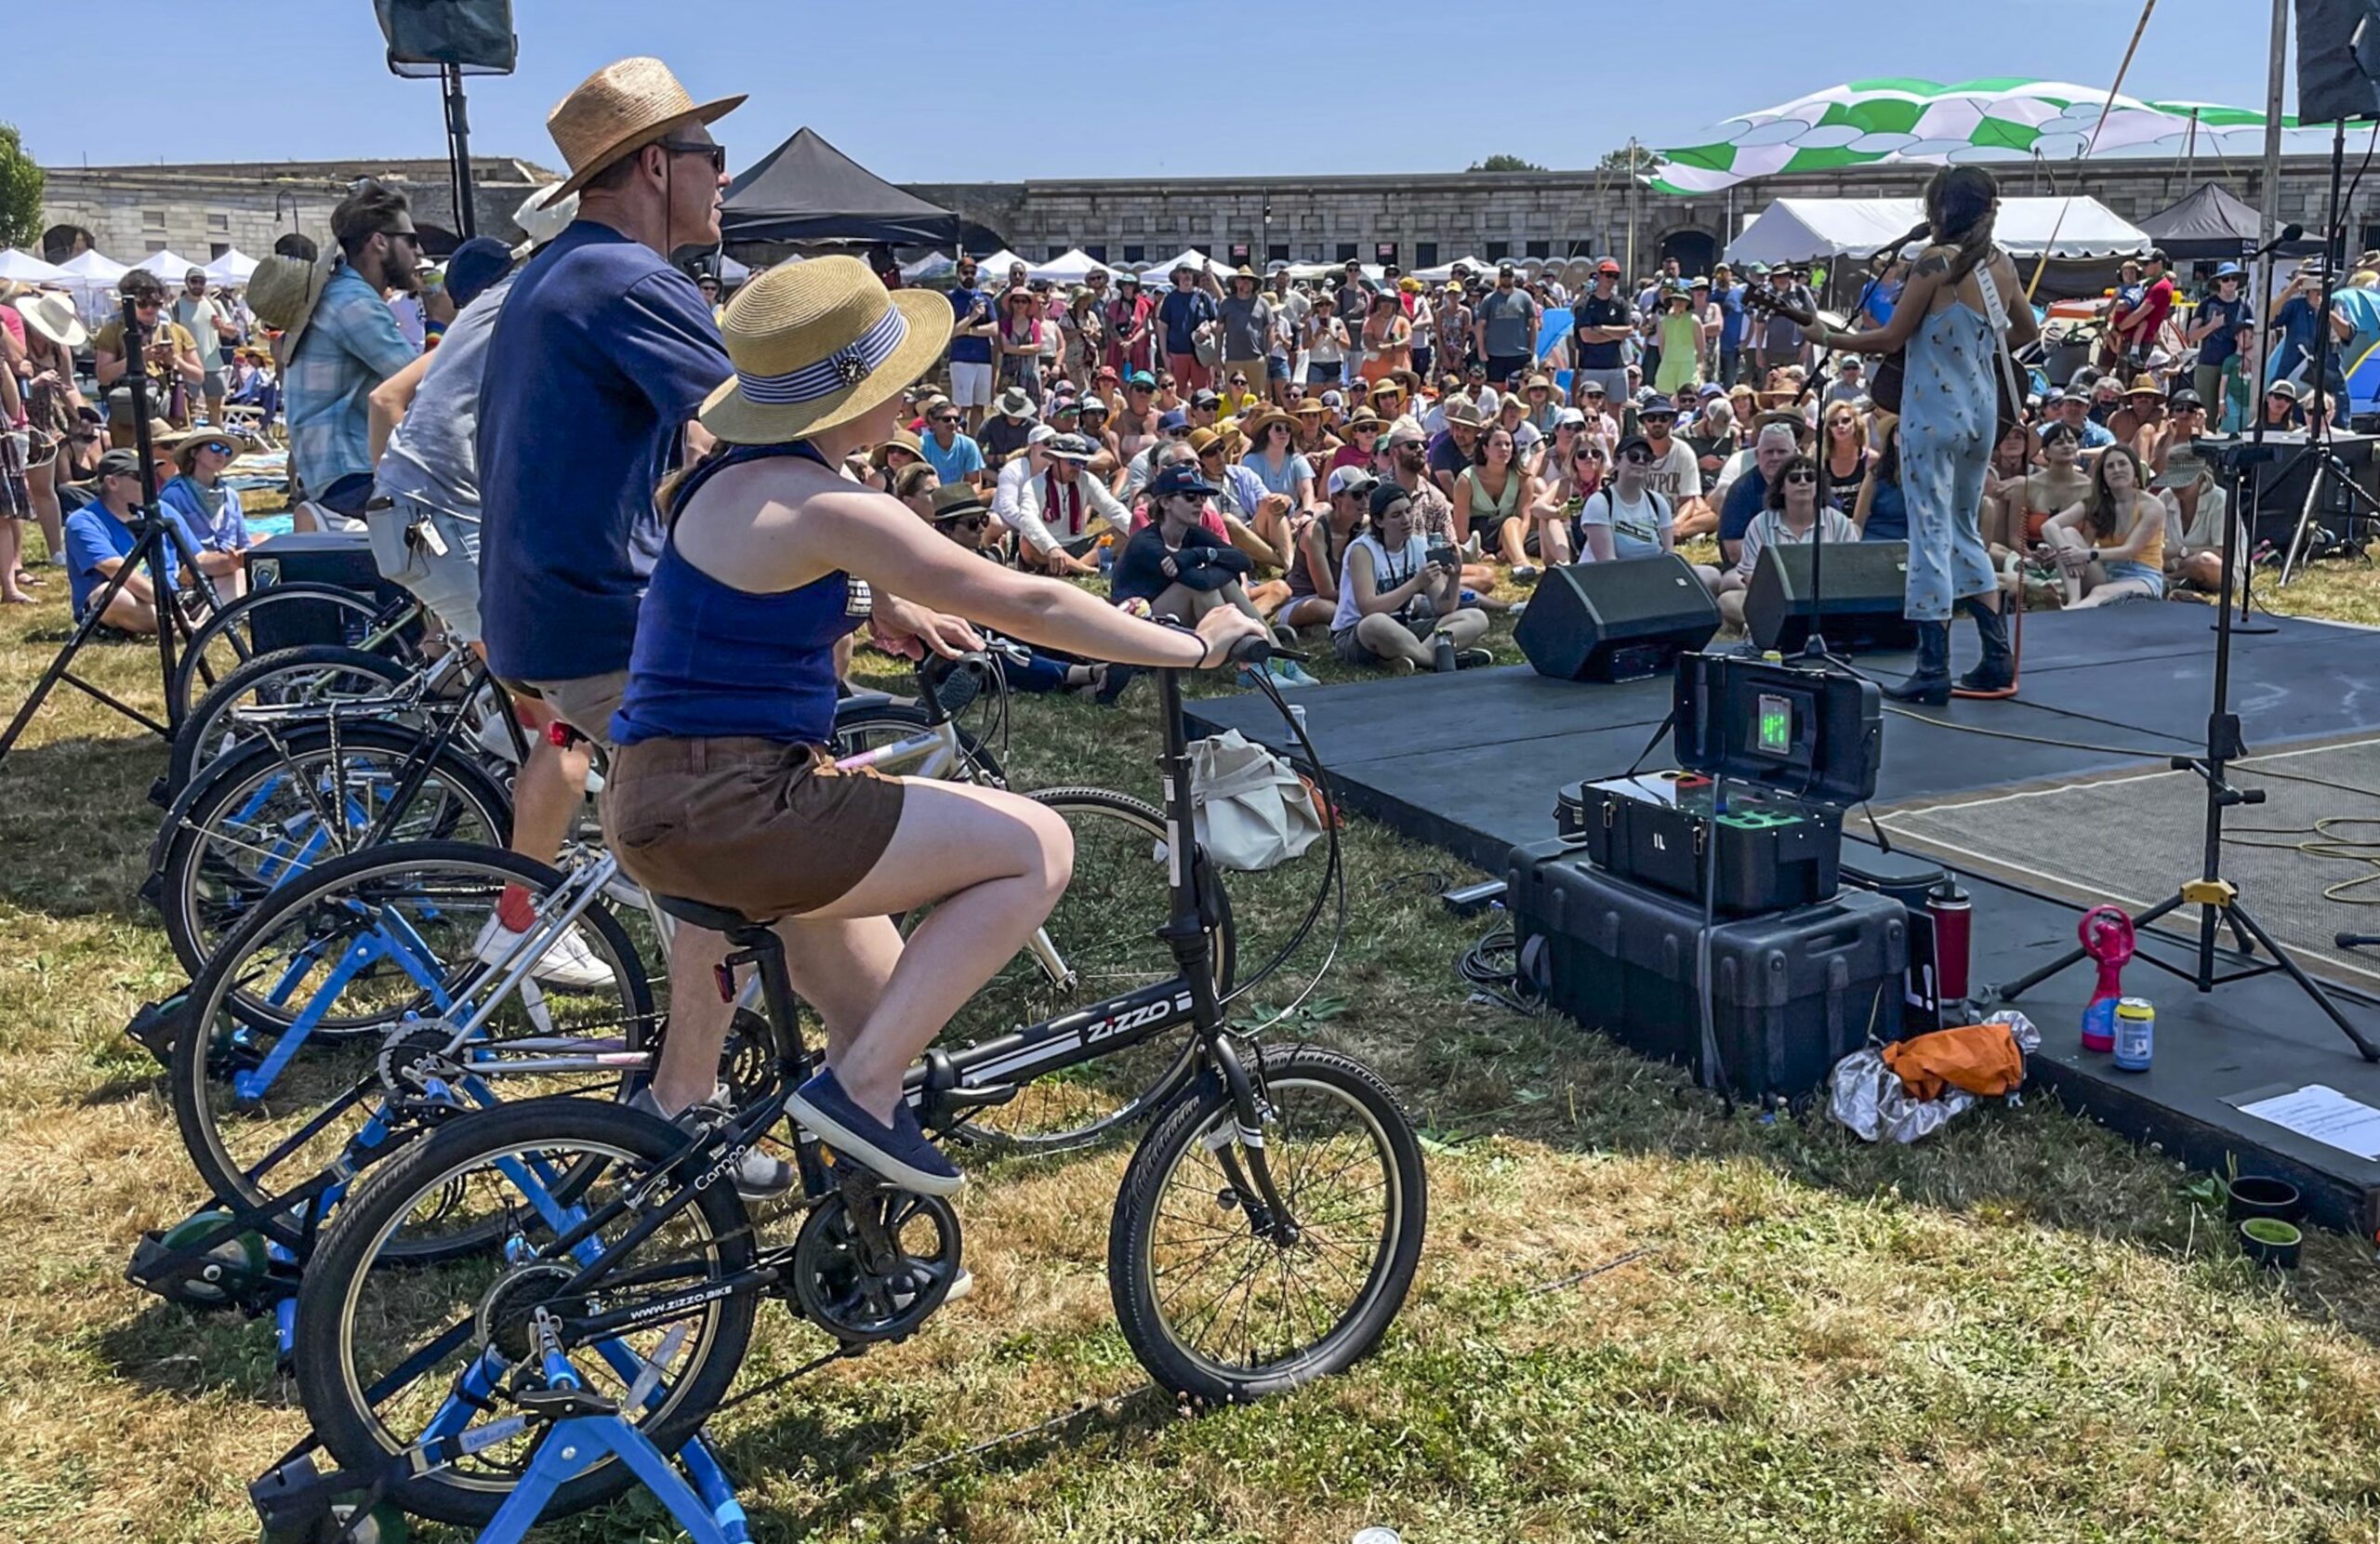 Madi Diaz, right, performs at the Newport Folk Festival's bike stage, powered in part by festivalgoers on stationary bicycles, left, Friday, July 22, 2022, in Newport, R.I. (AP Photo/Pat Eaton-Robb)